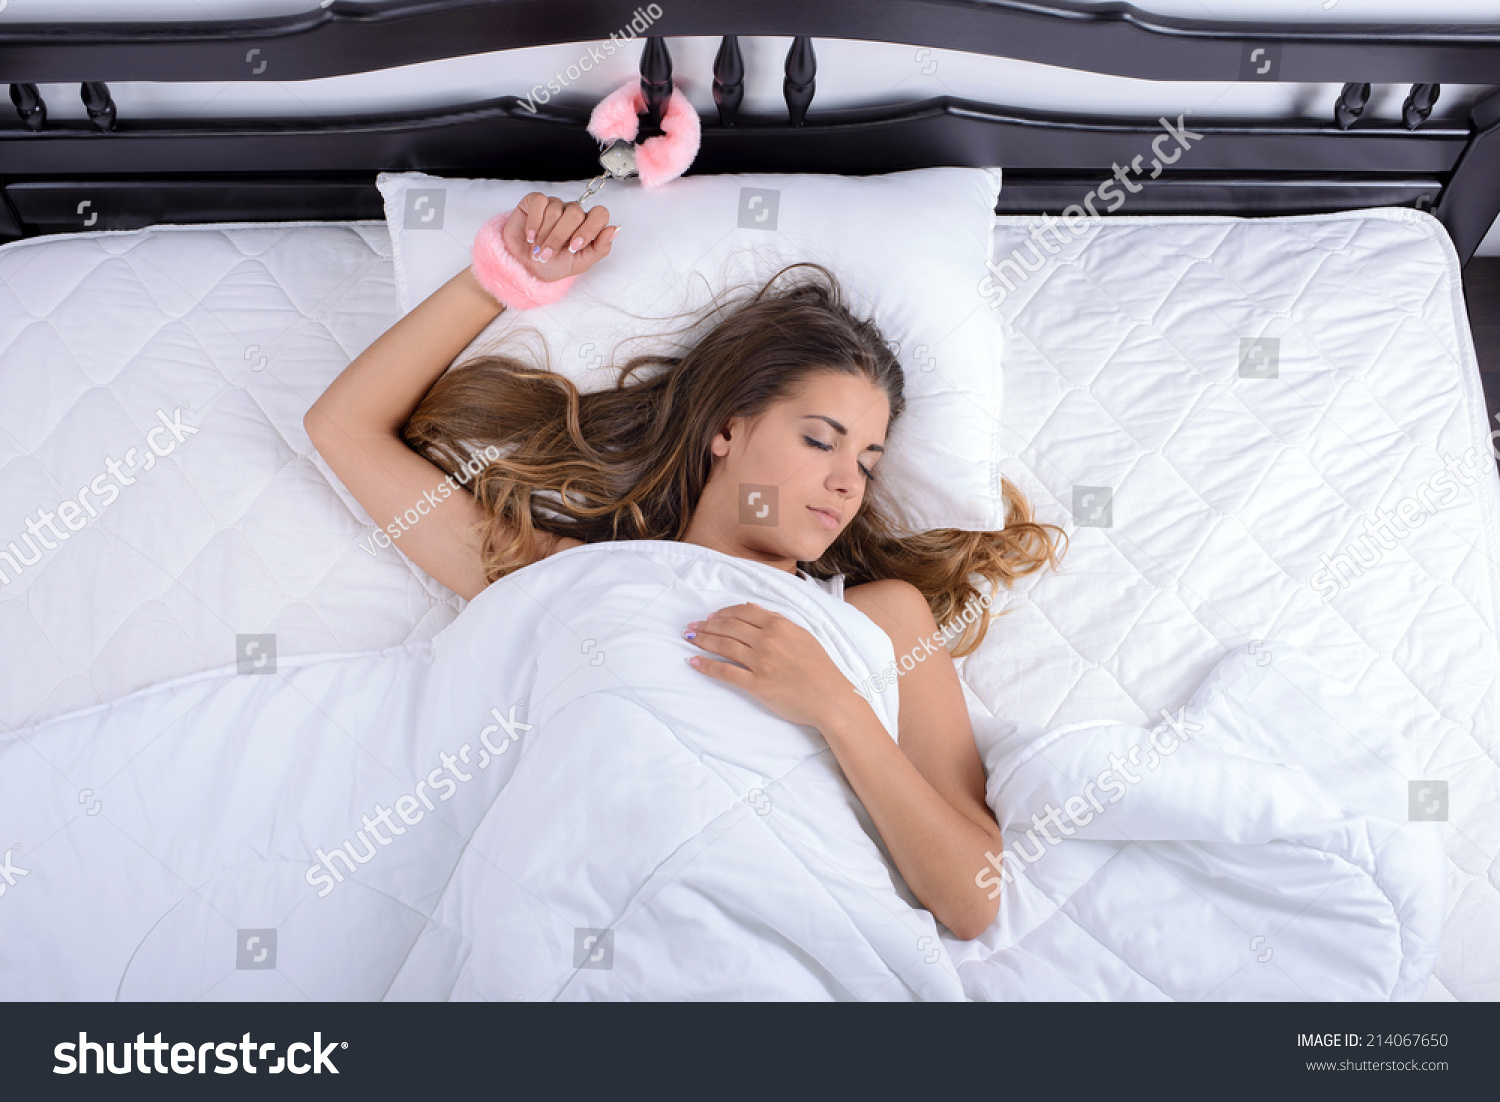 Young Sexy Girl Lying In Bed With Handcuffs Chained To A Bed In Her